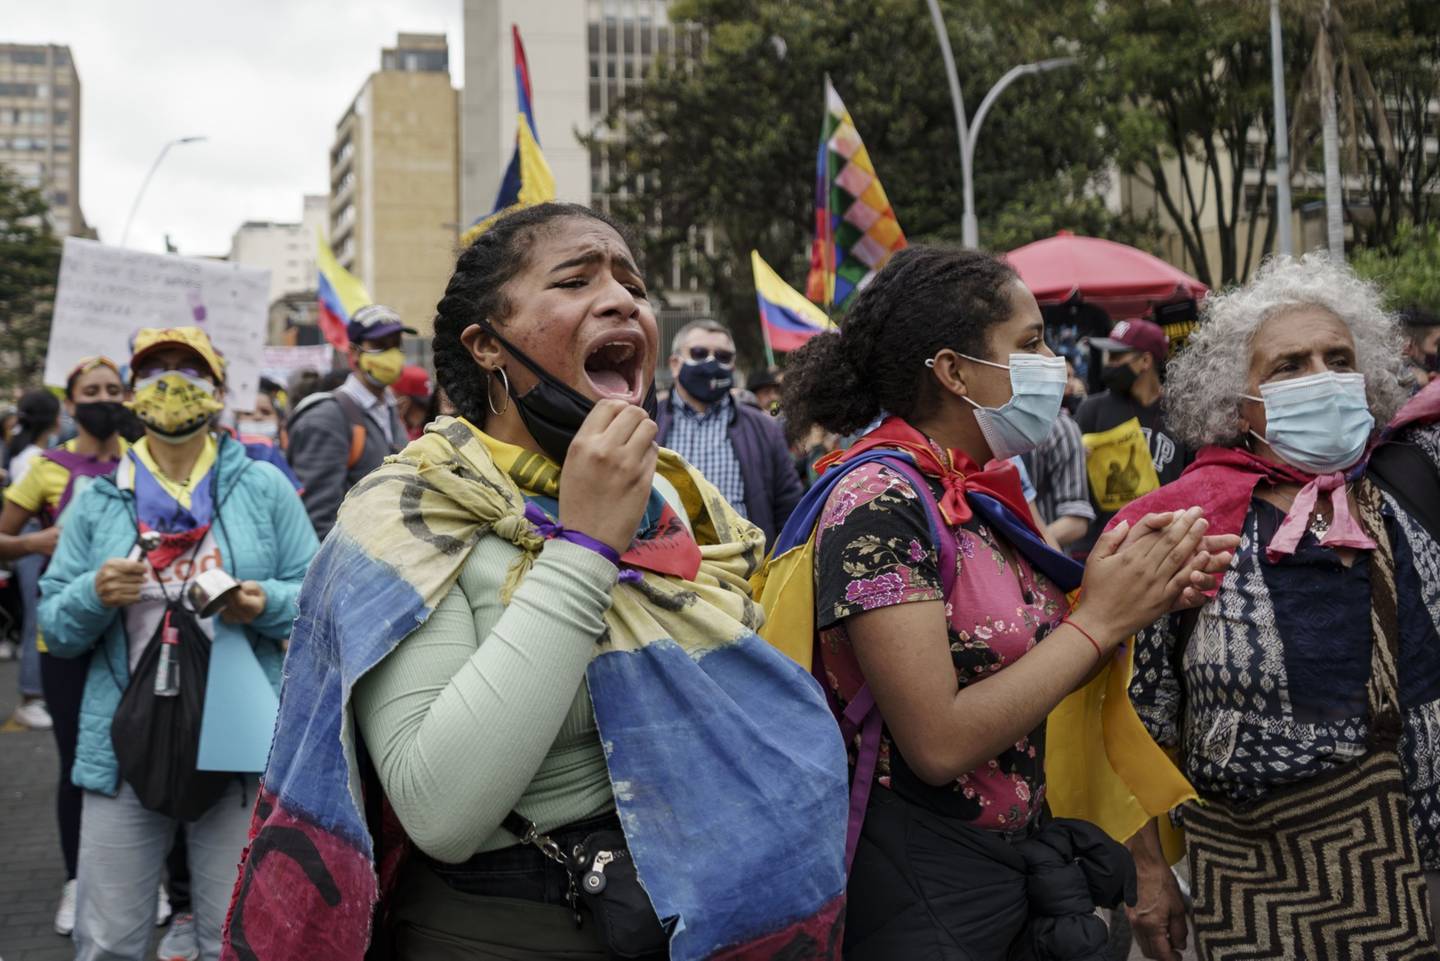 Demonstrators shout slogans during an anti-government protest in Bogota, Colombia, on Tuesday, July 20, 2021. Unions have organized nationwide protests on Colombia's Independence Day, as thegovernment presents a new tax bill to Congress after the last proposal was withdrawn amid a backlash. Photographer: Carlos Bernate/Bloomberg